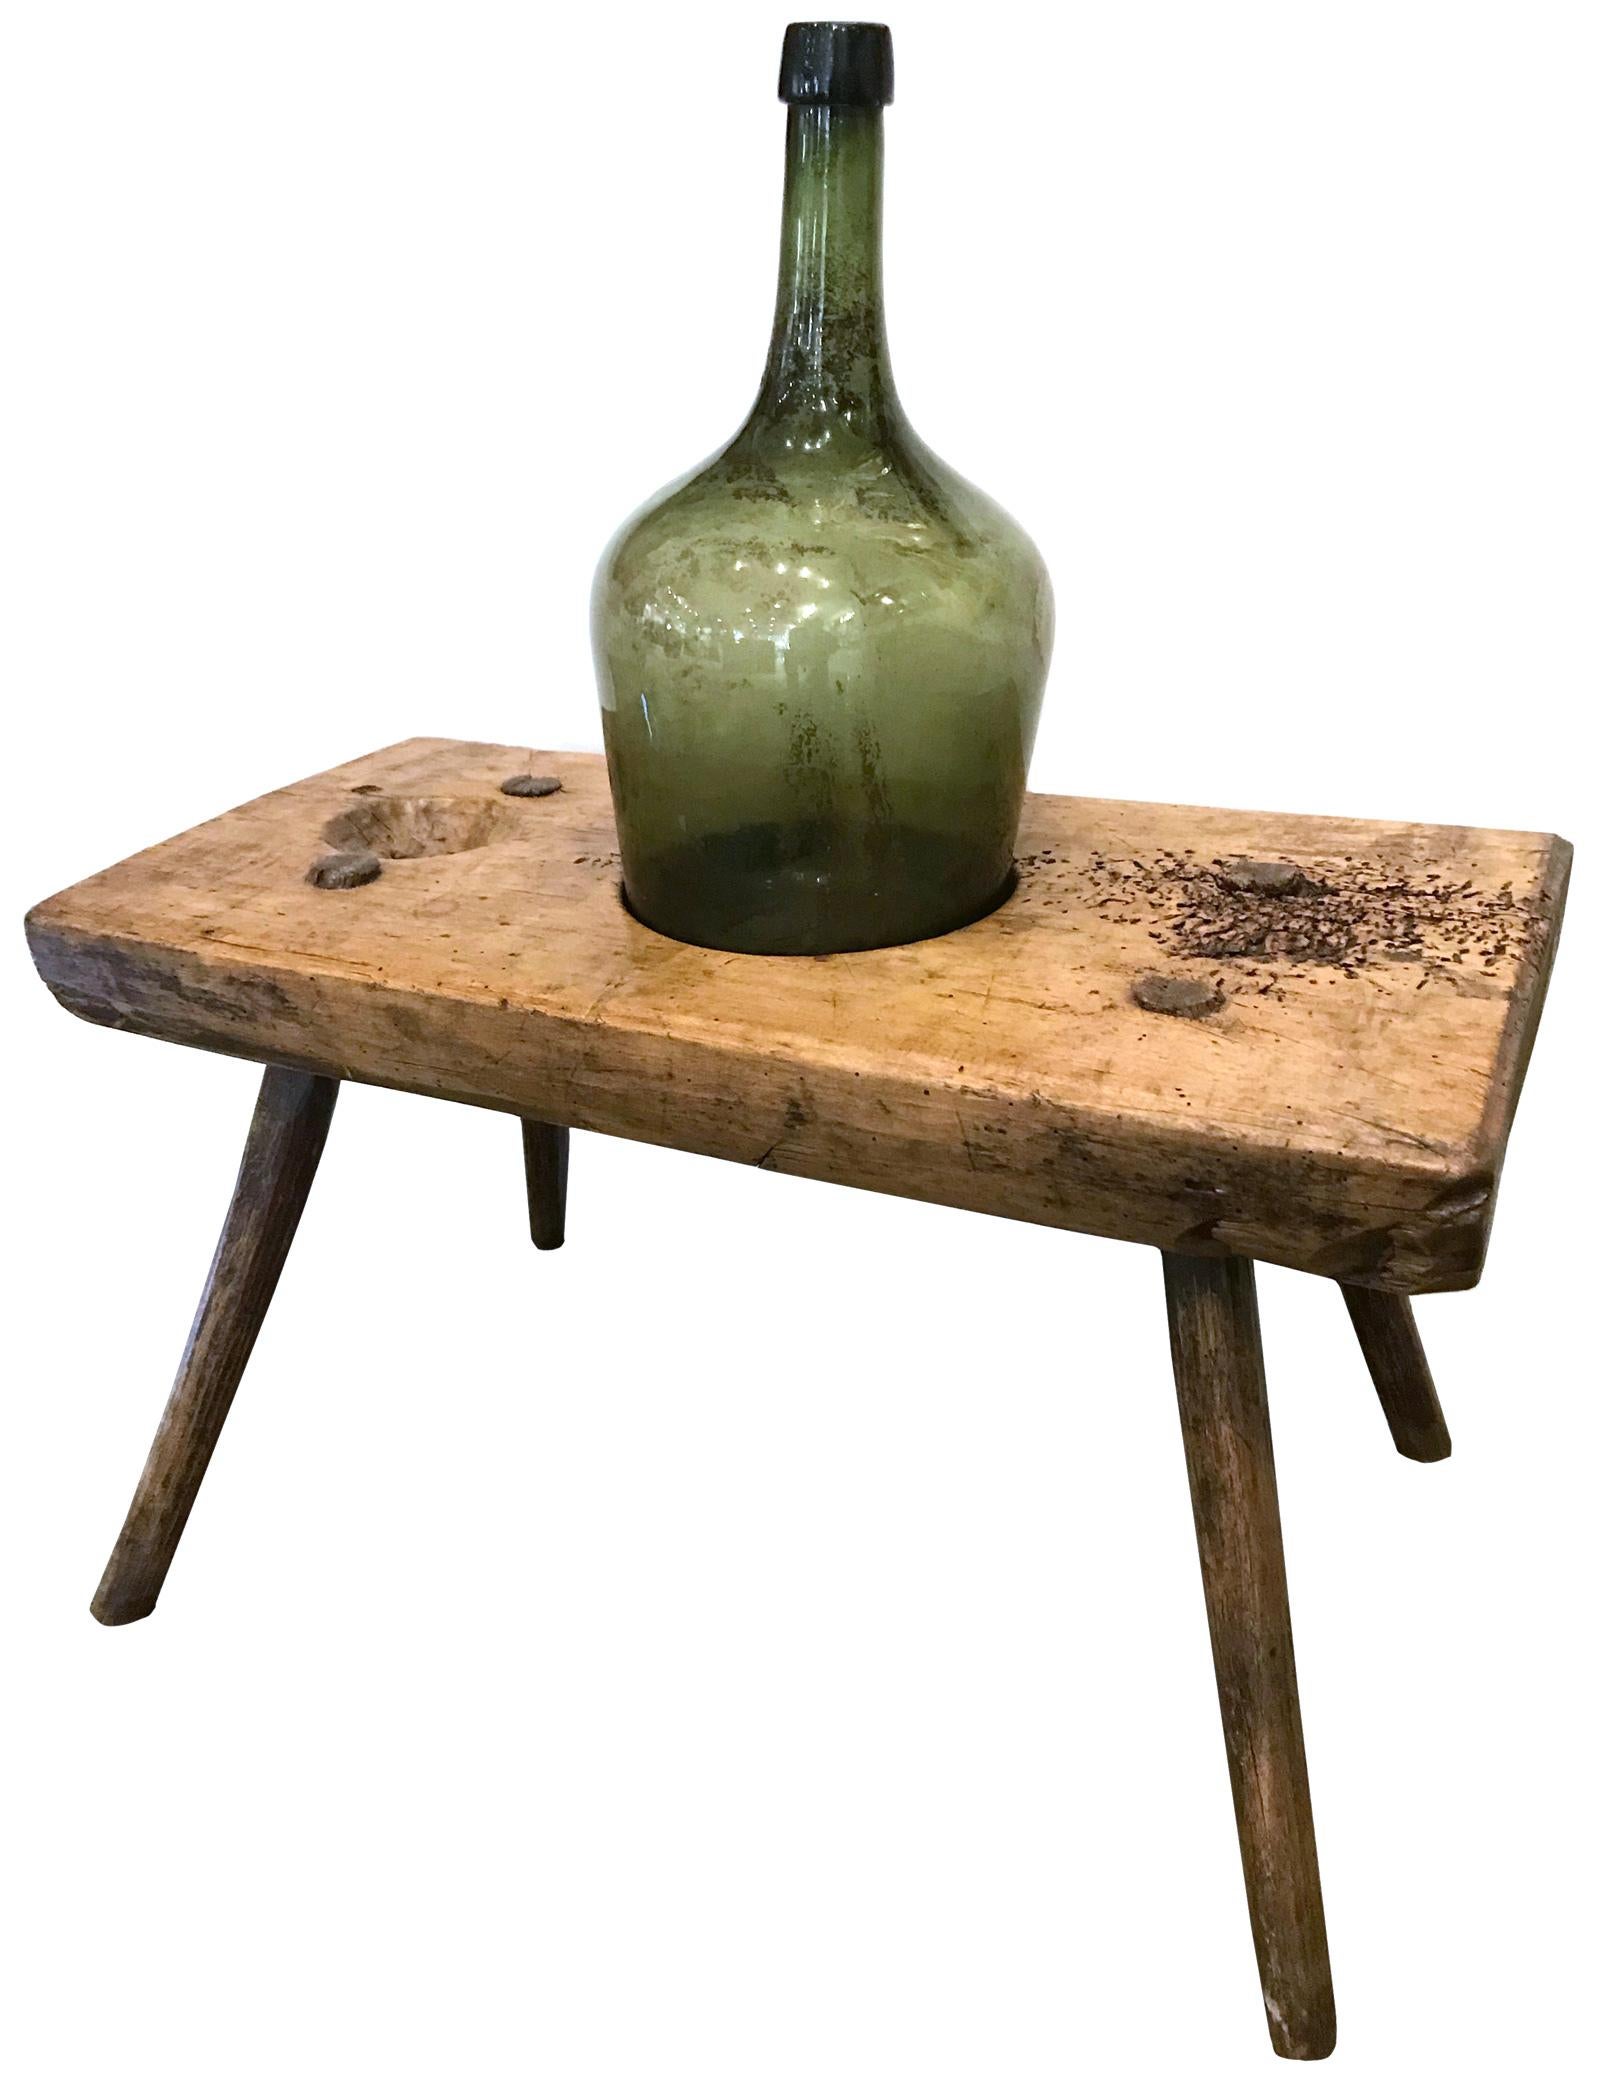 A 19th century French walnut bottle-corking bench, made for use in homes where small batches of home-made wine were harvested and bottled, with 19th century blown-glass decanter.